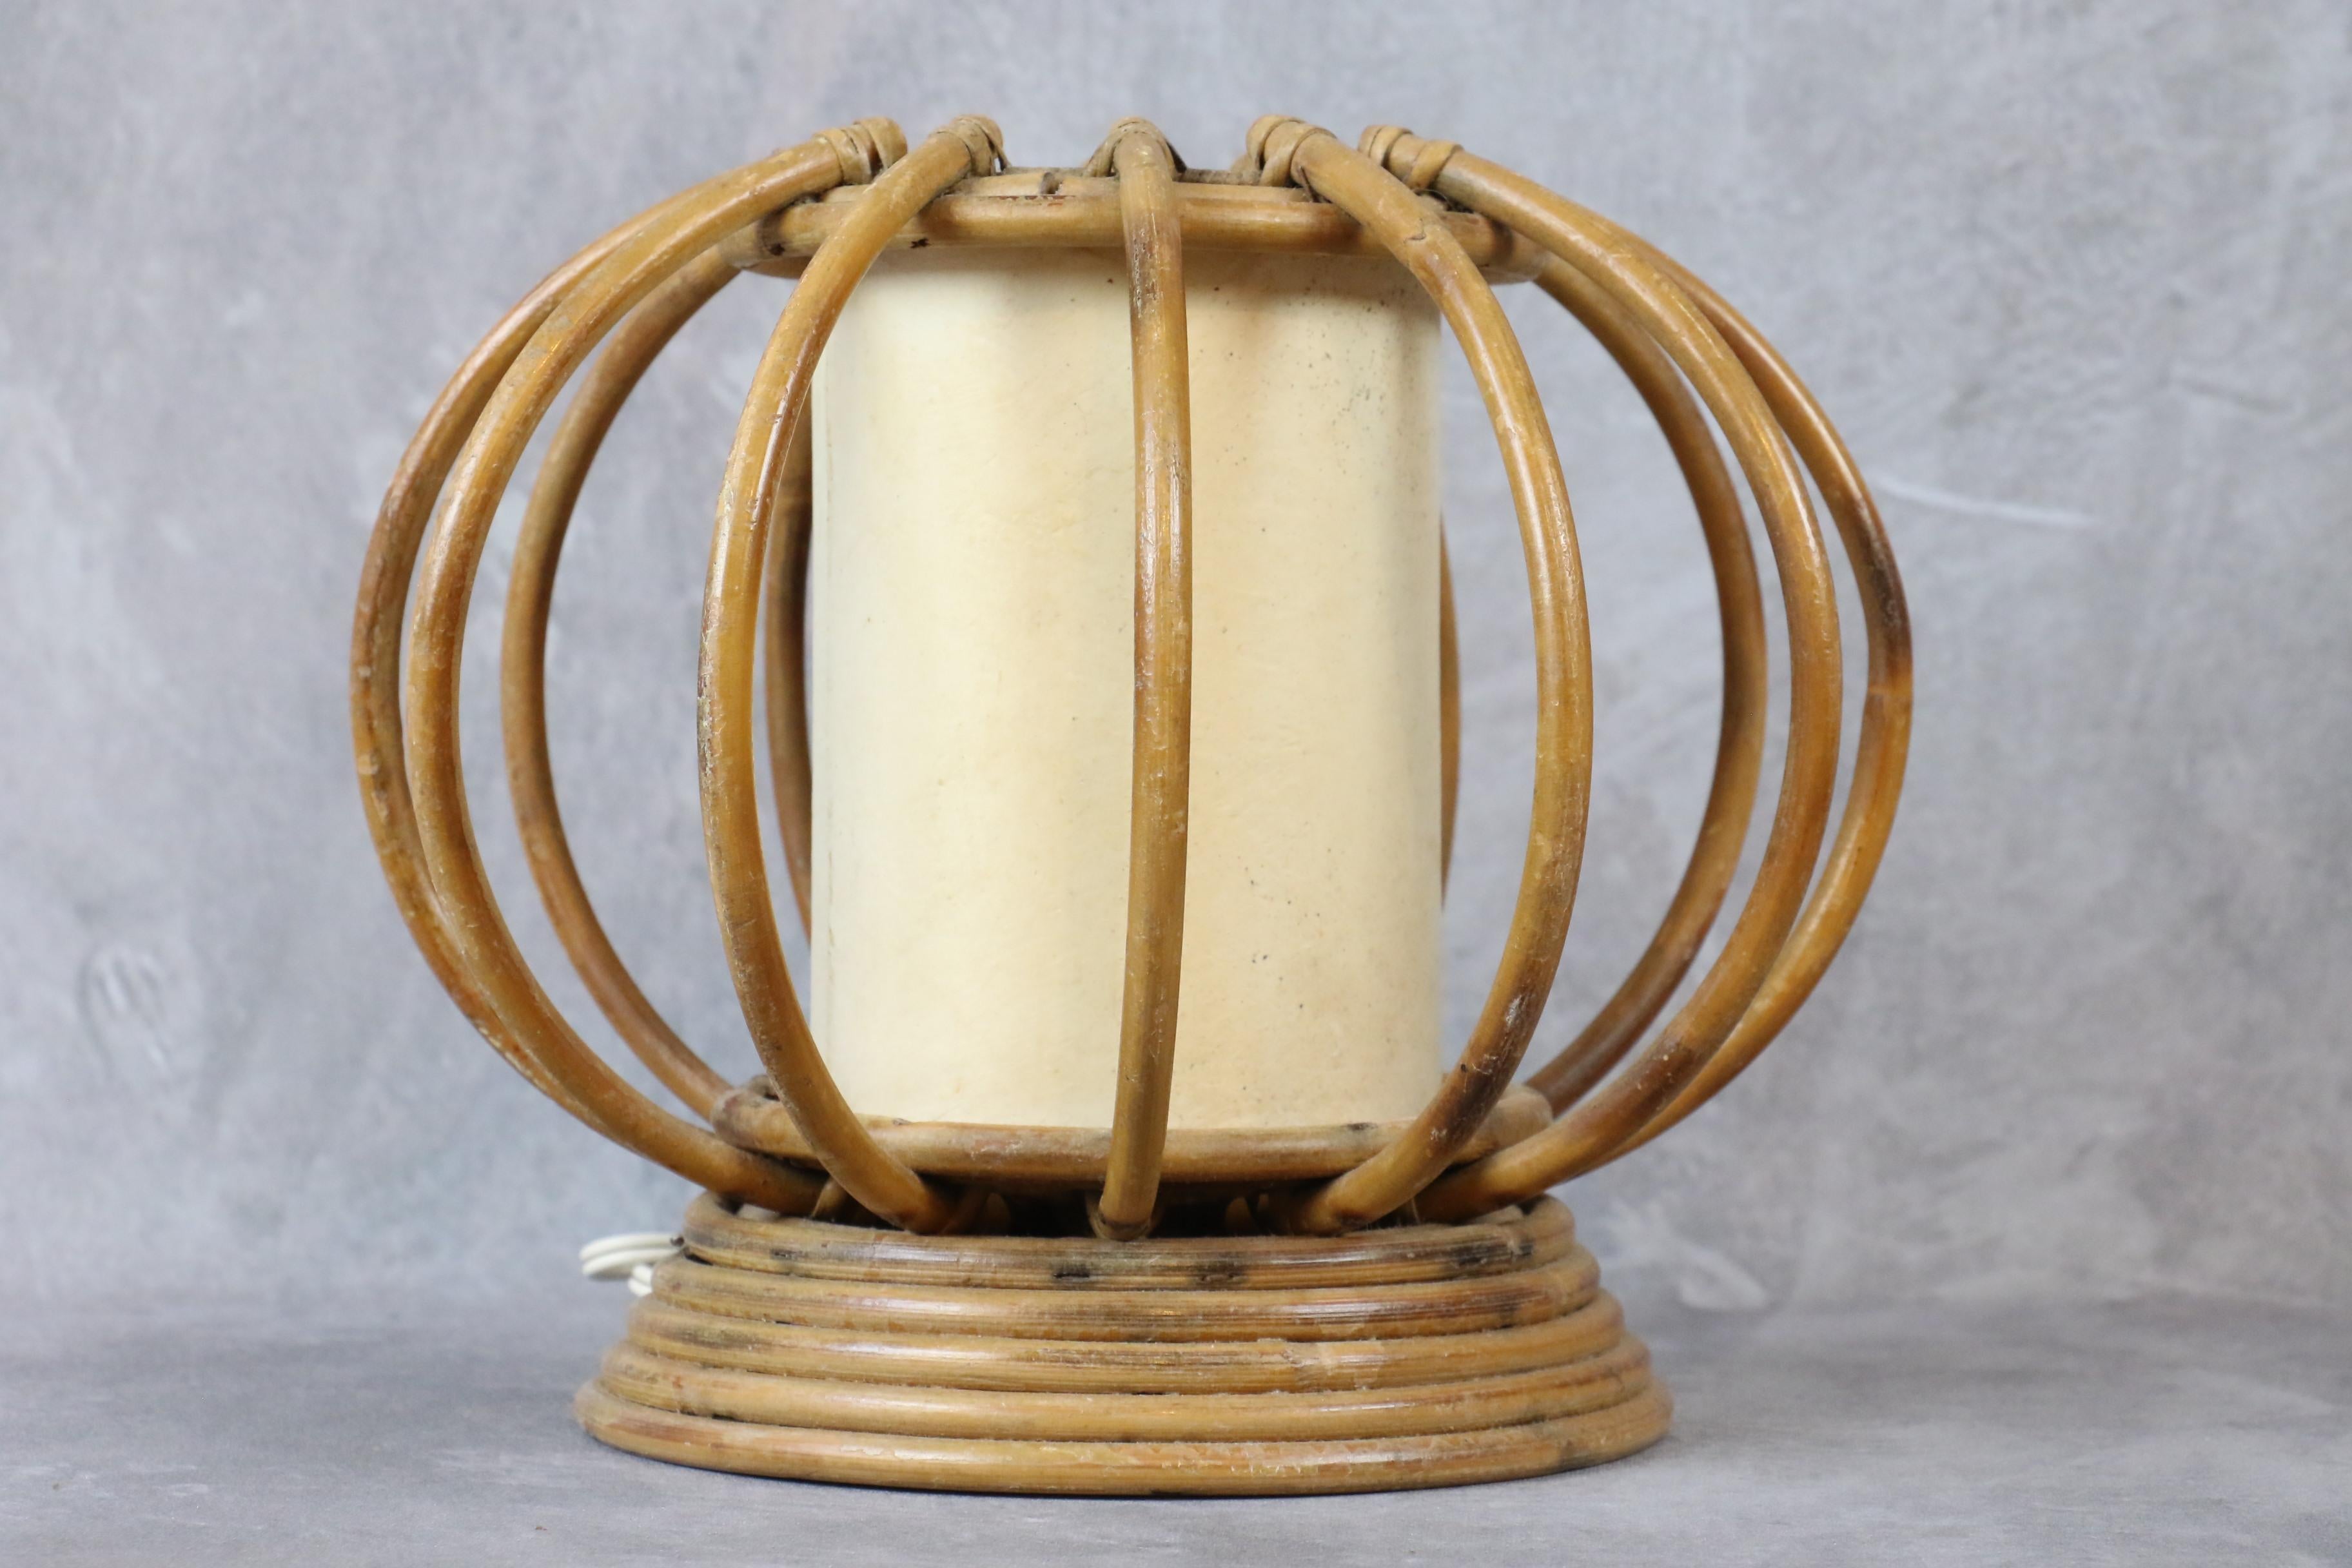 Louis Sognot Bamboo and Rattan Table Lamp Mid-Century Modern 1960, France

Very nice bedside lamp by the French designer Louis Sognot. It is very well made. The artist has created many models using bamboo and rattan for the structure of his